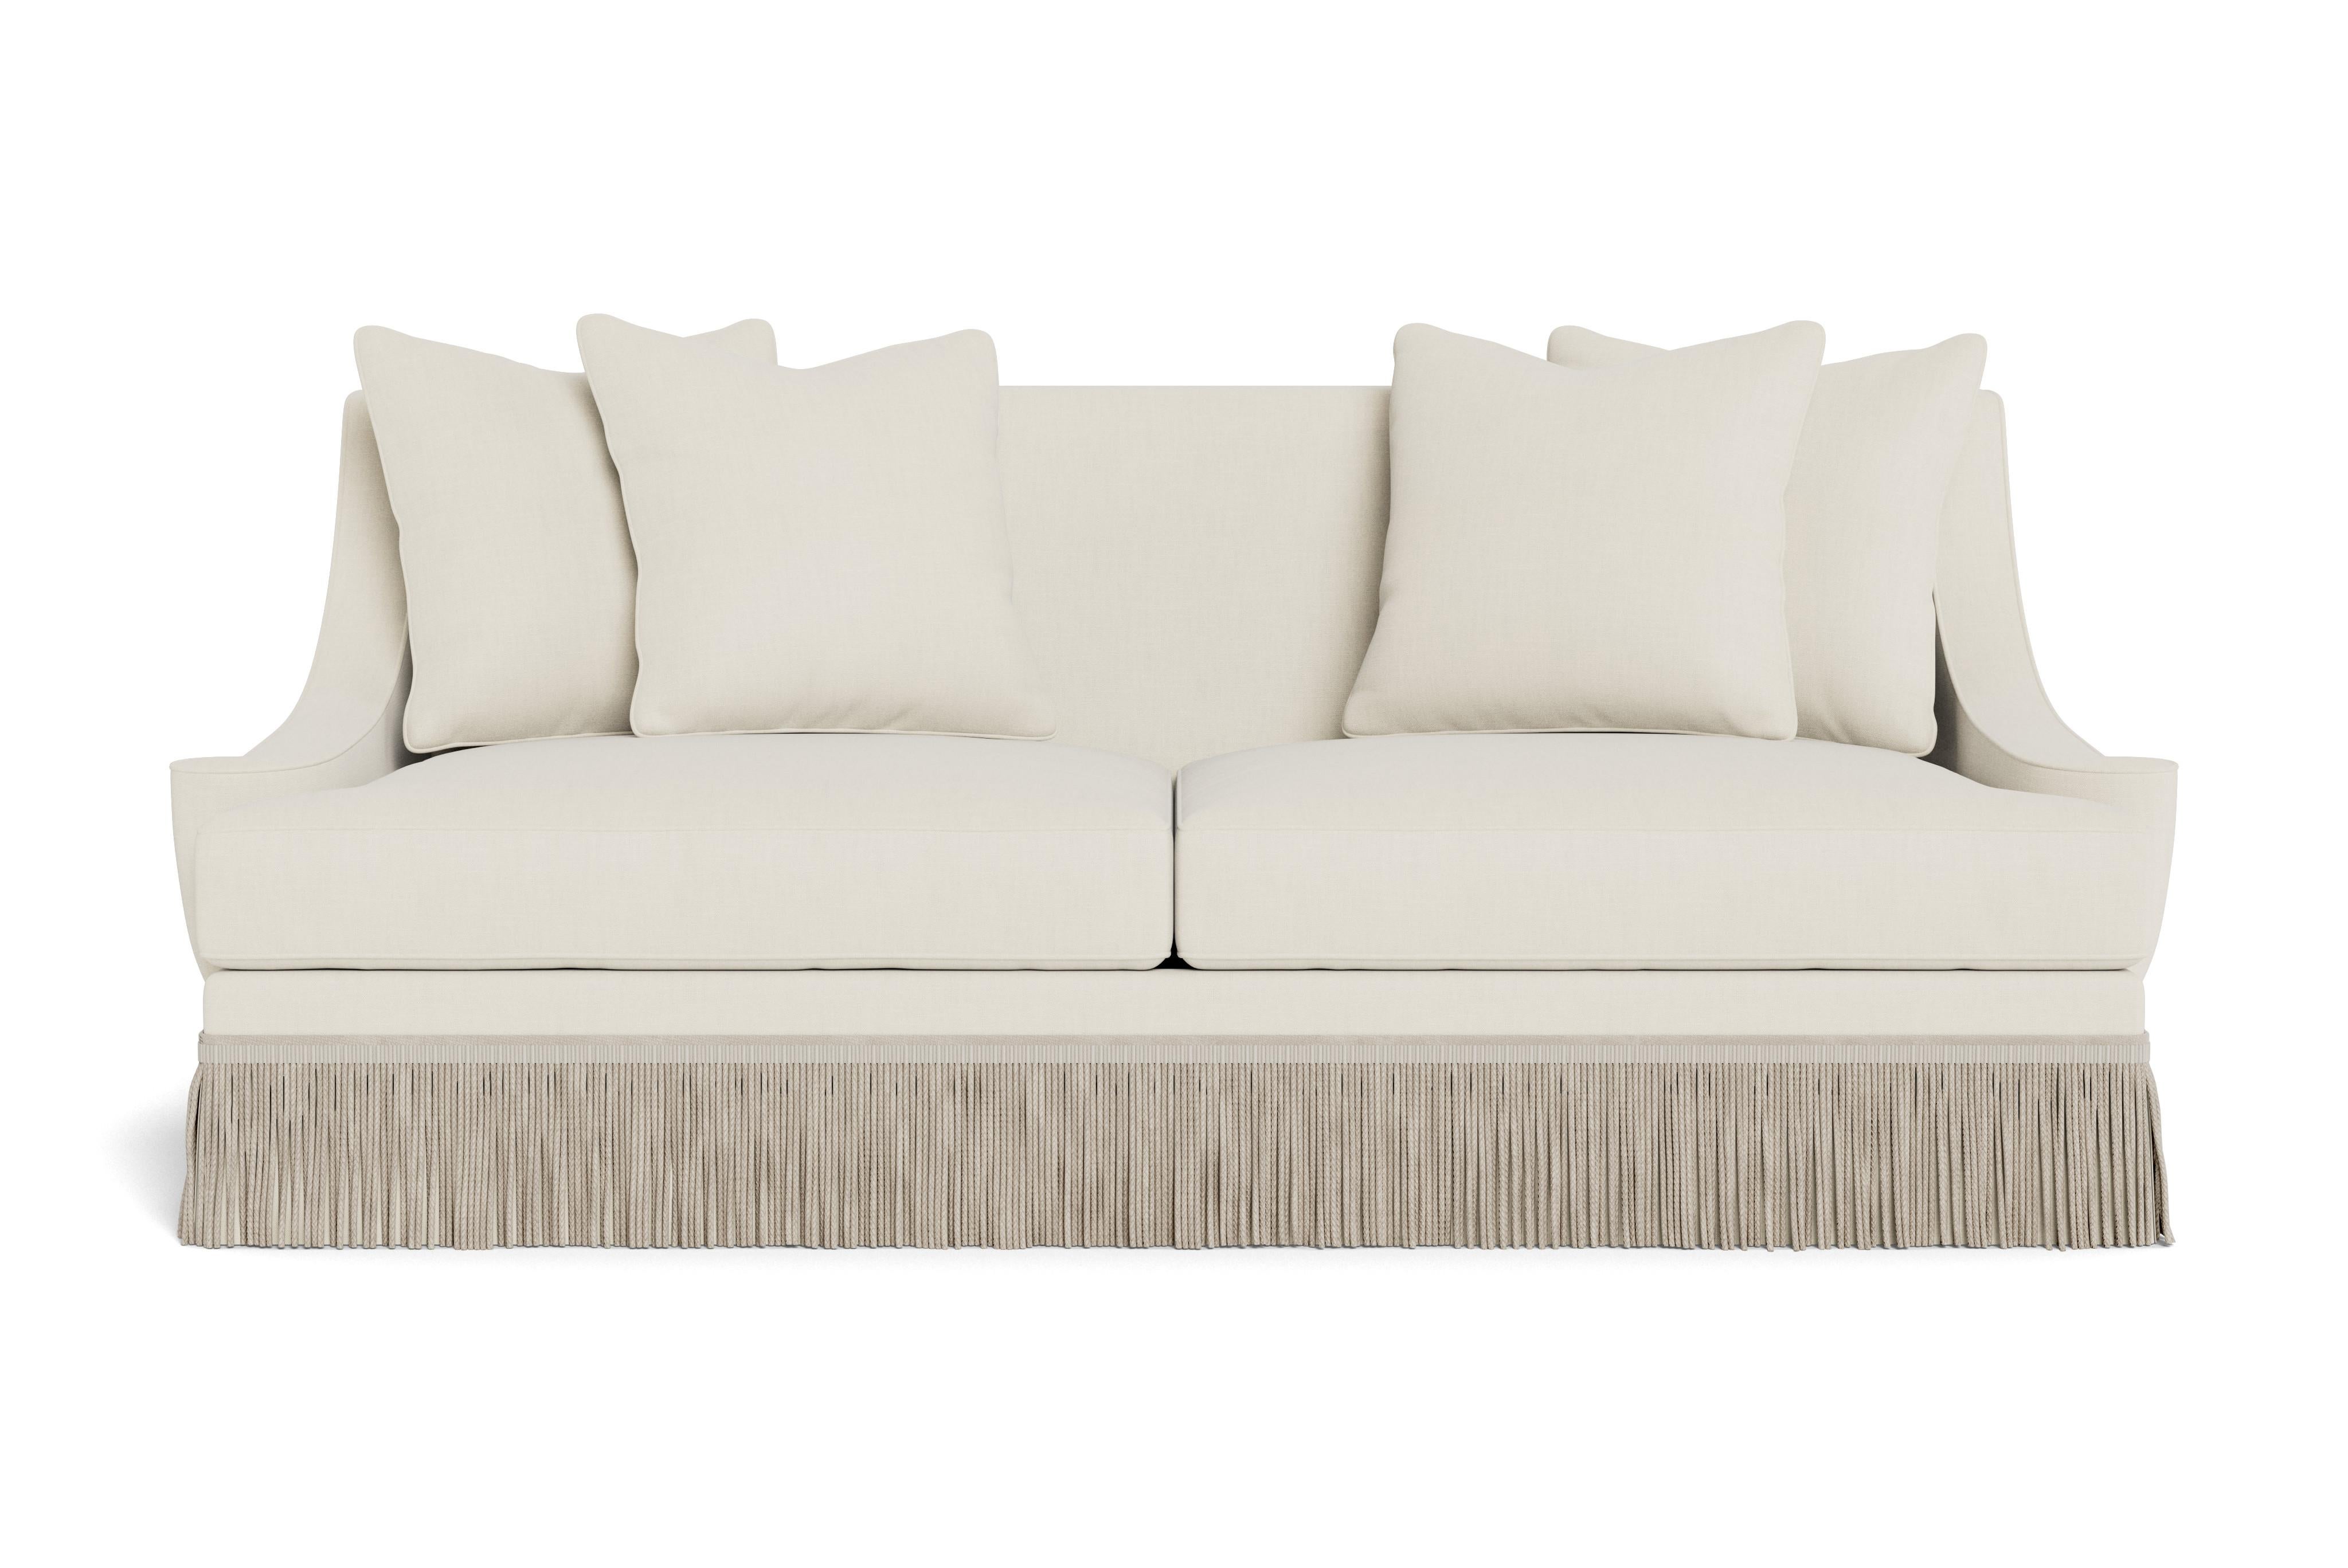 A deep, comfortable, and sophisticated sofa. Welcoming, curvaceous arms descend and slightly flare out, a sophisticated design complemented by 8.25